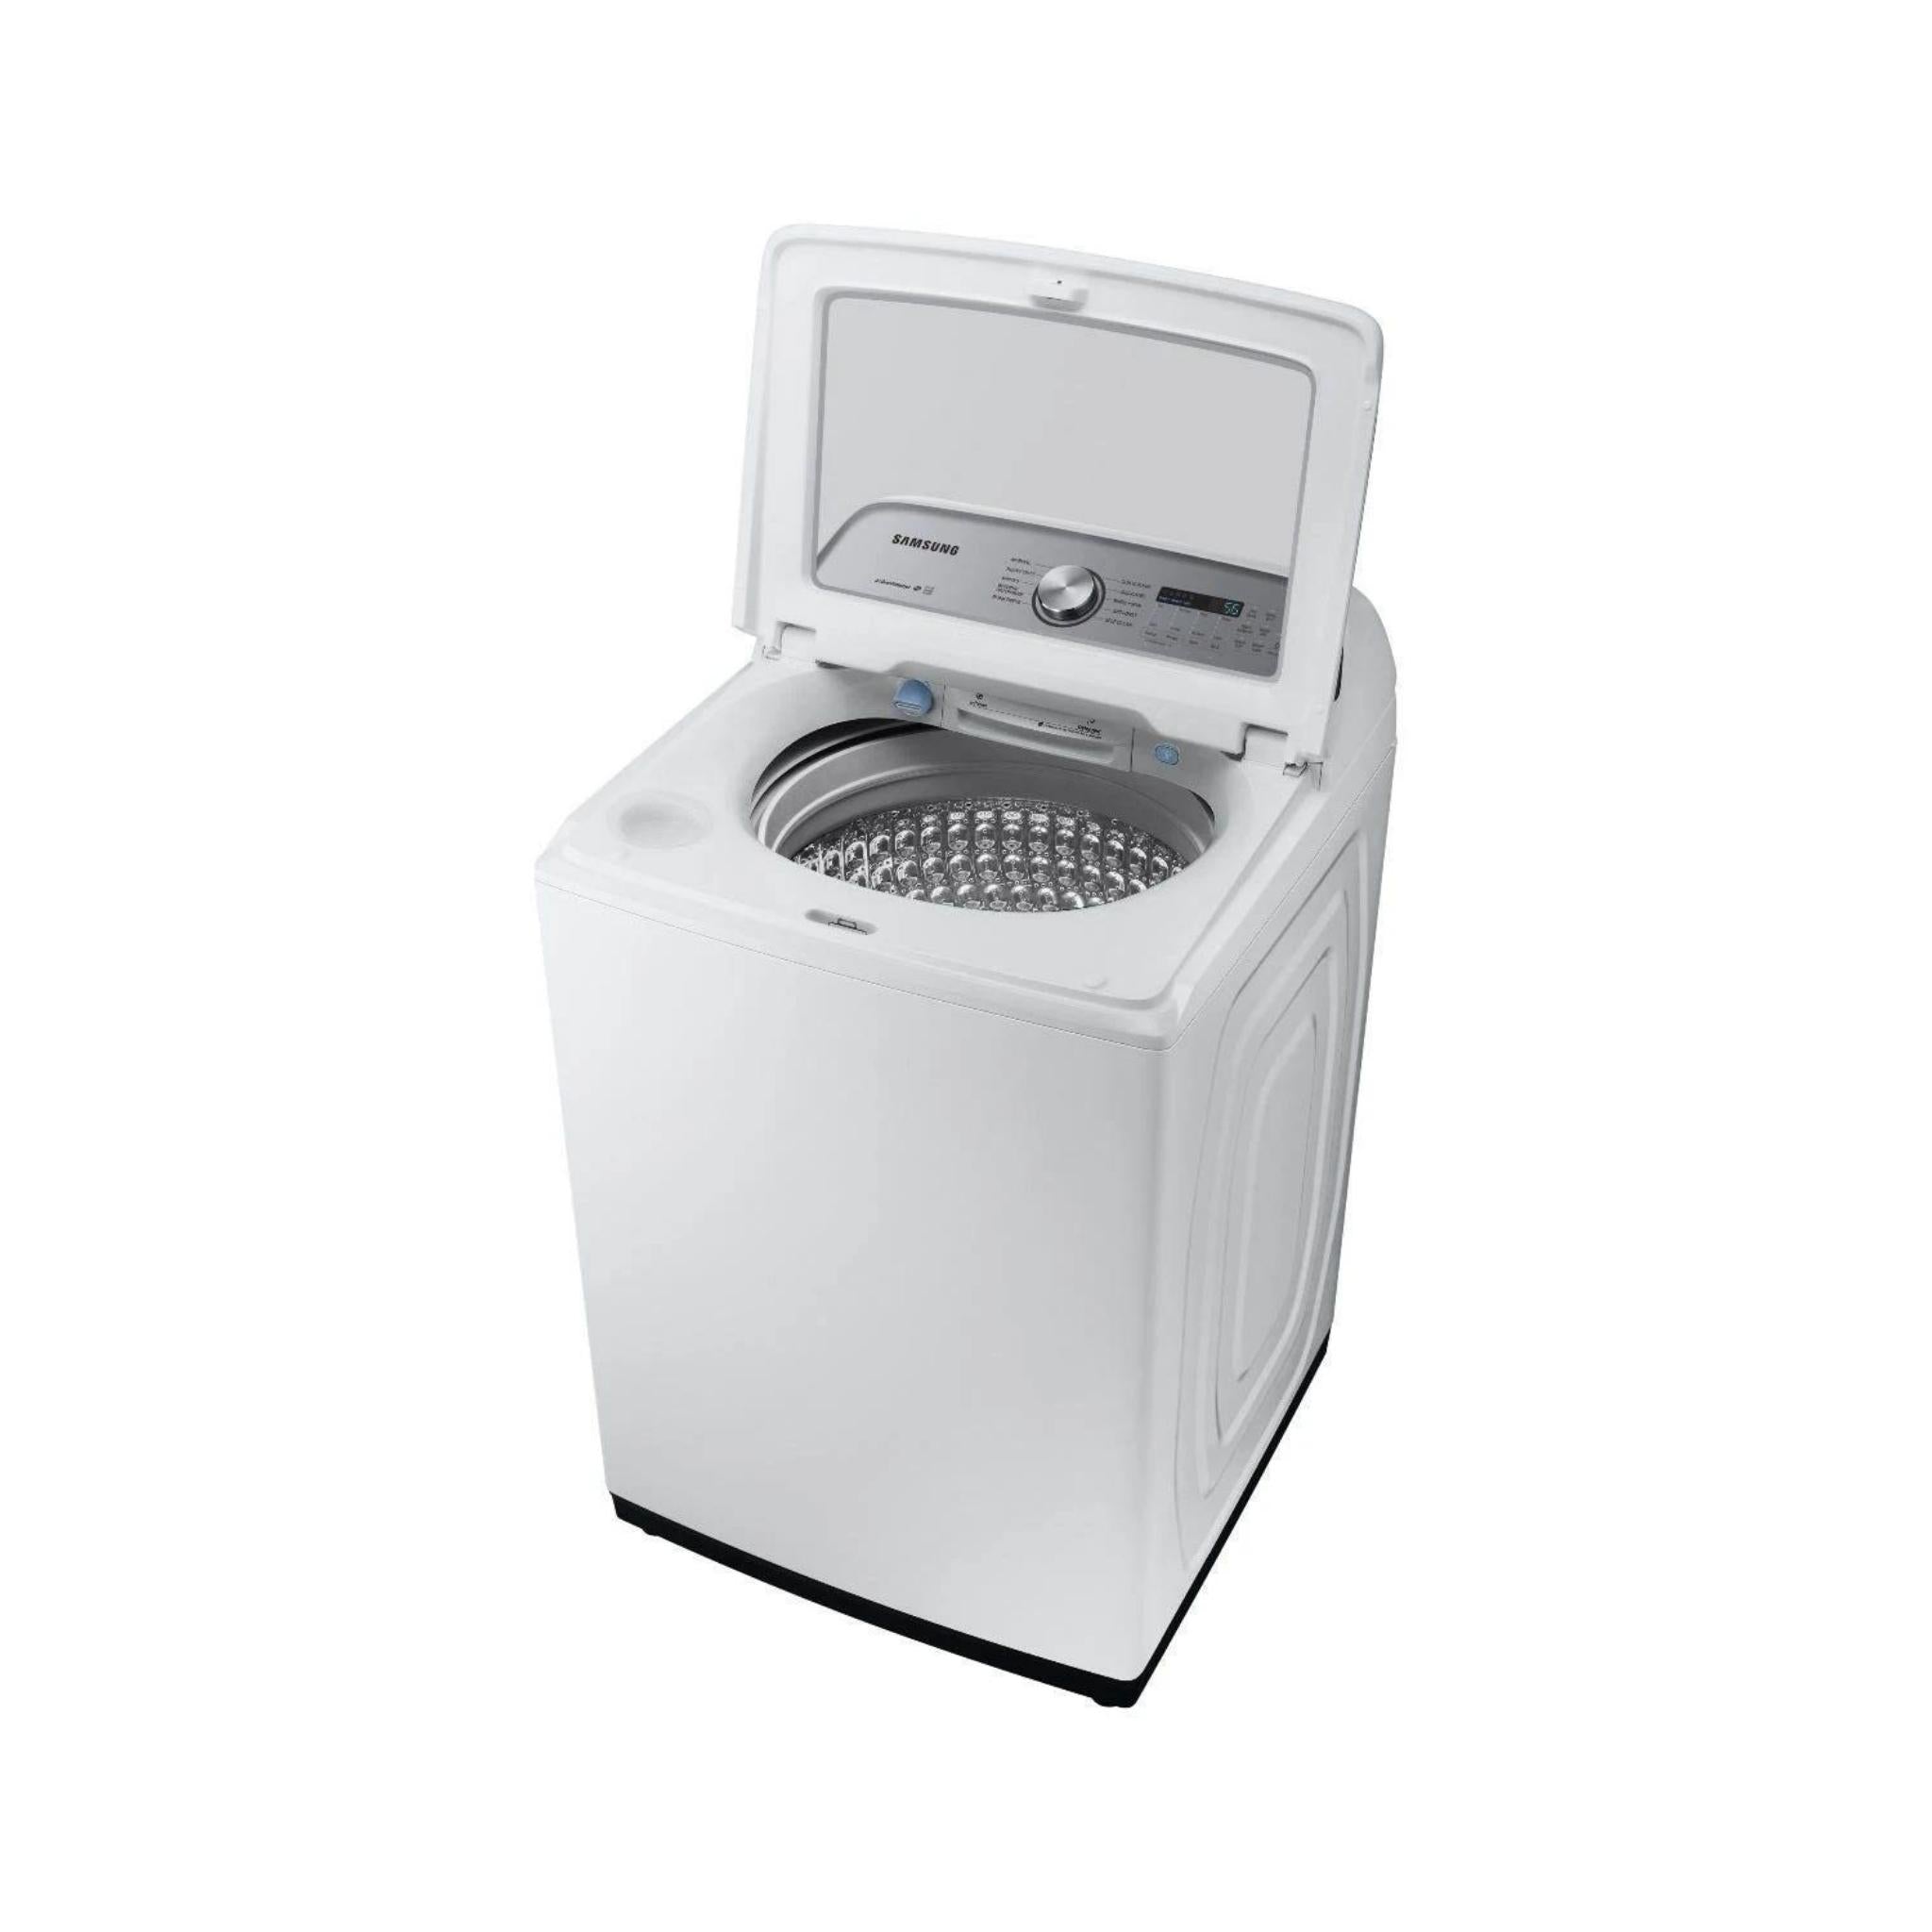 Samsung 5.8 cu.ft. Top Load Washer with EZ Access Drum